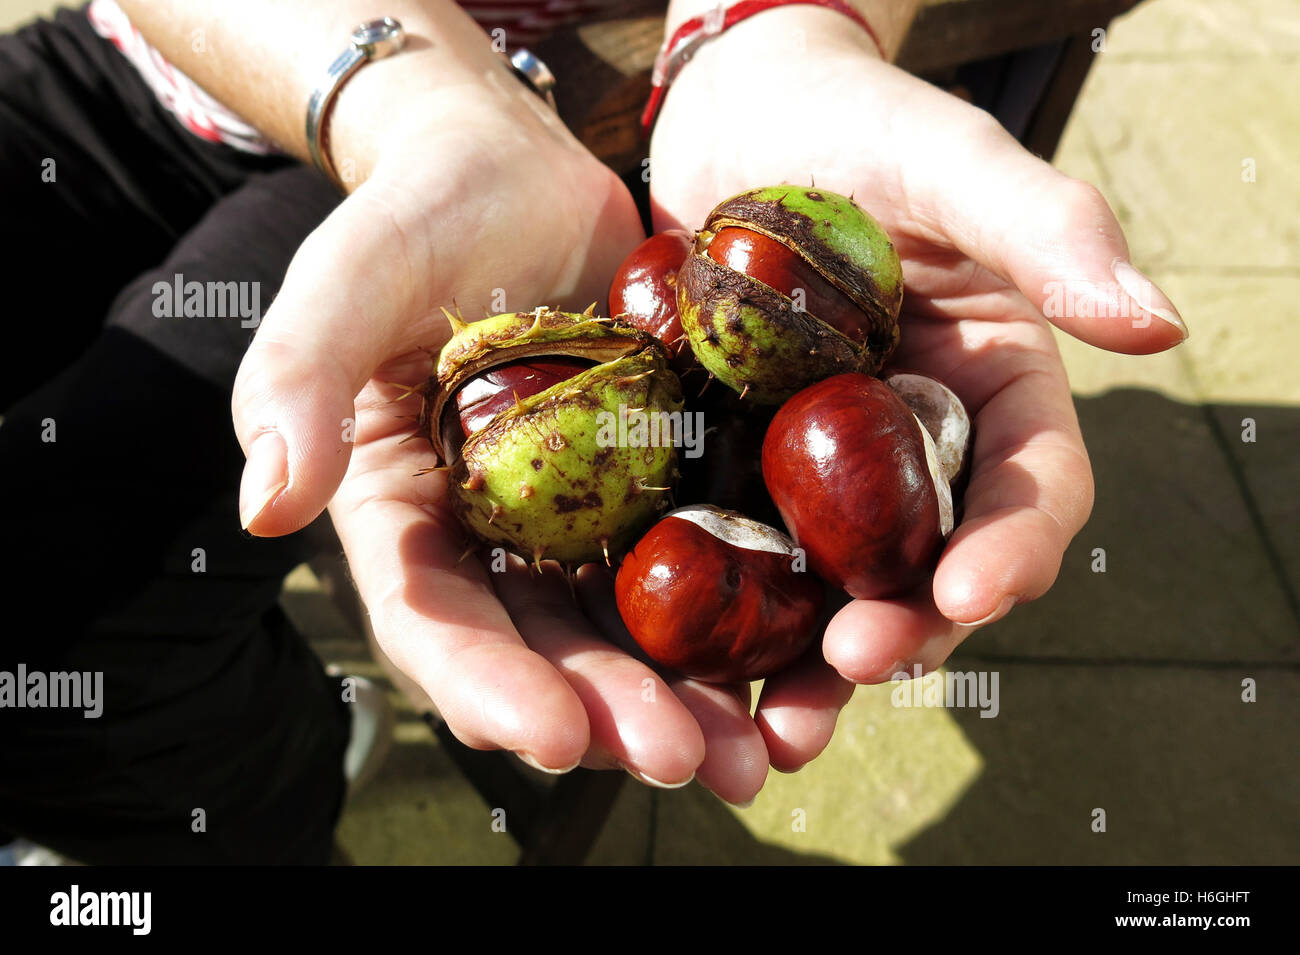 Freshly fallen conkers (Horse Chestnuts - Aesculus hippocastanum) some still in husks scooped up into woman's cupped hands Stock Photo